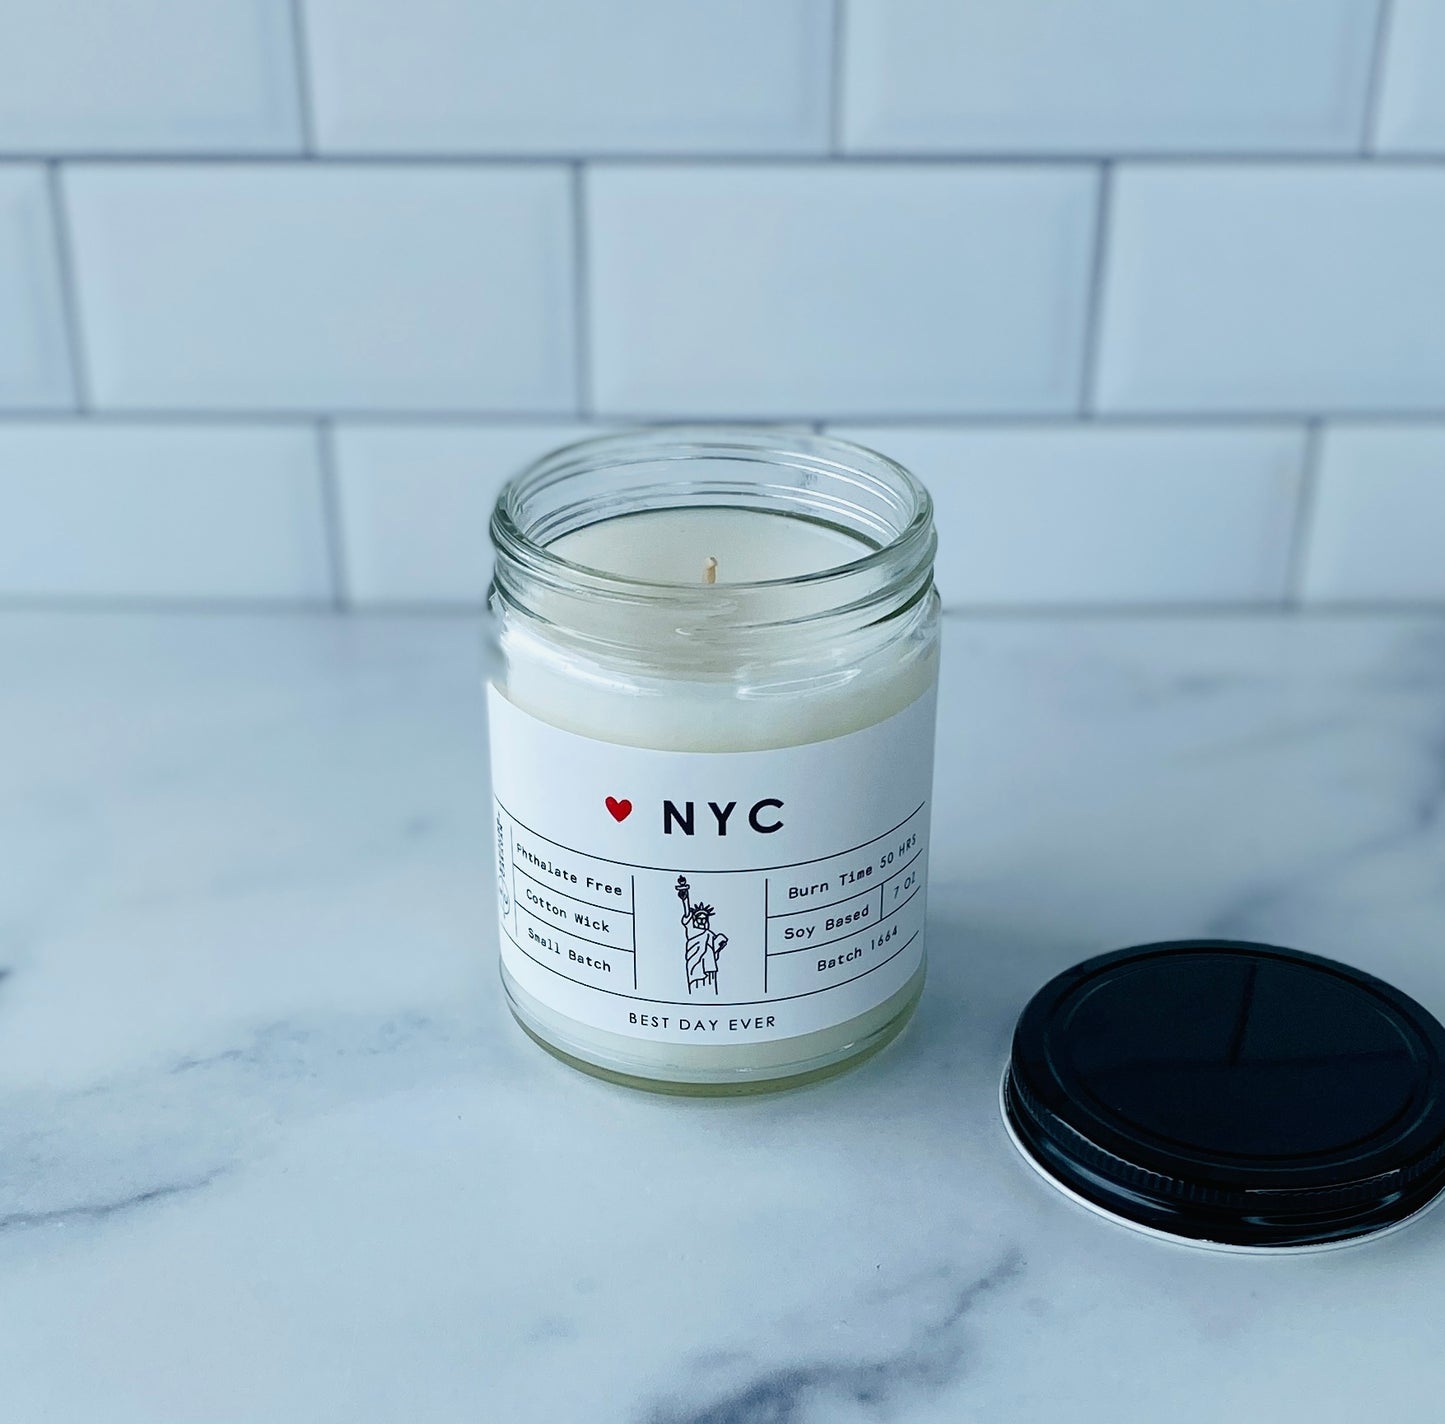 NYC, New York Candle